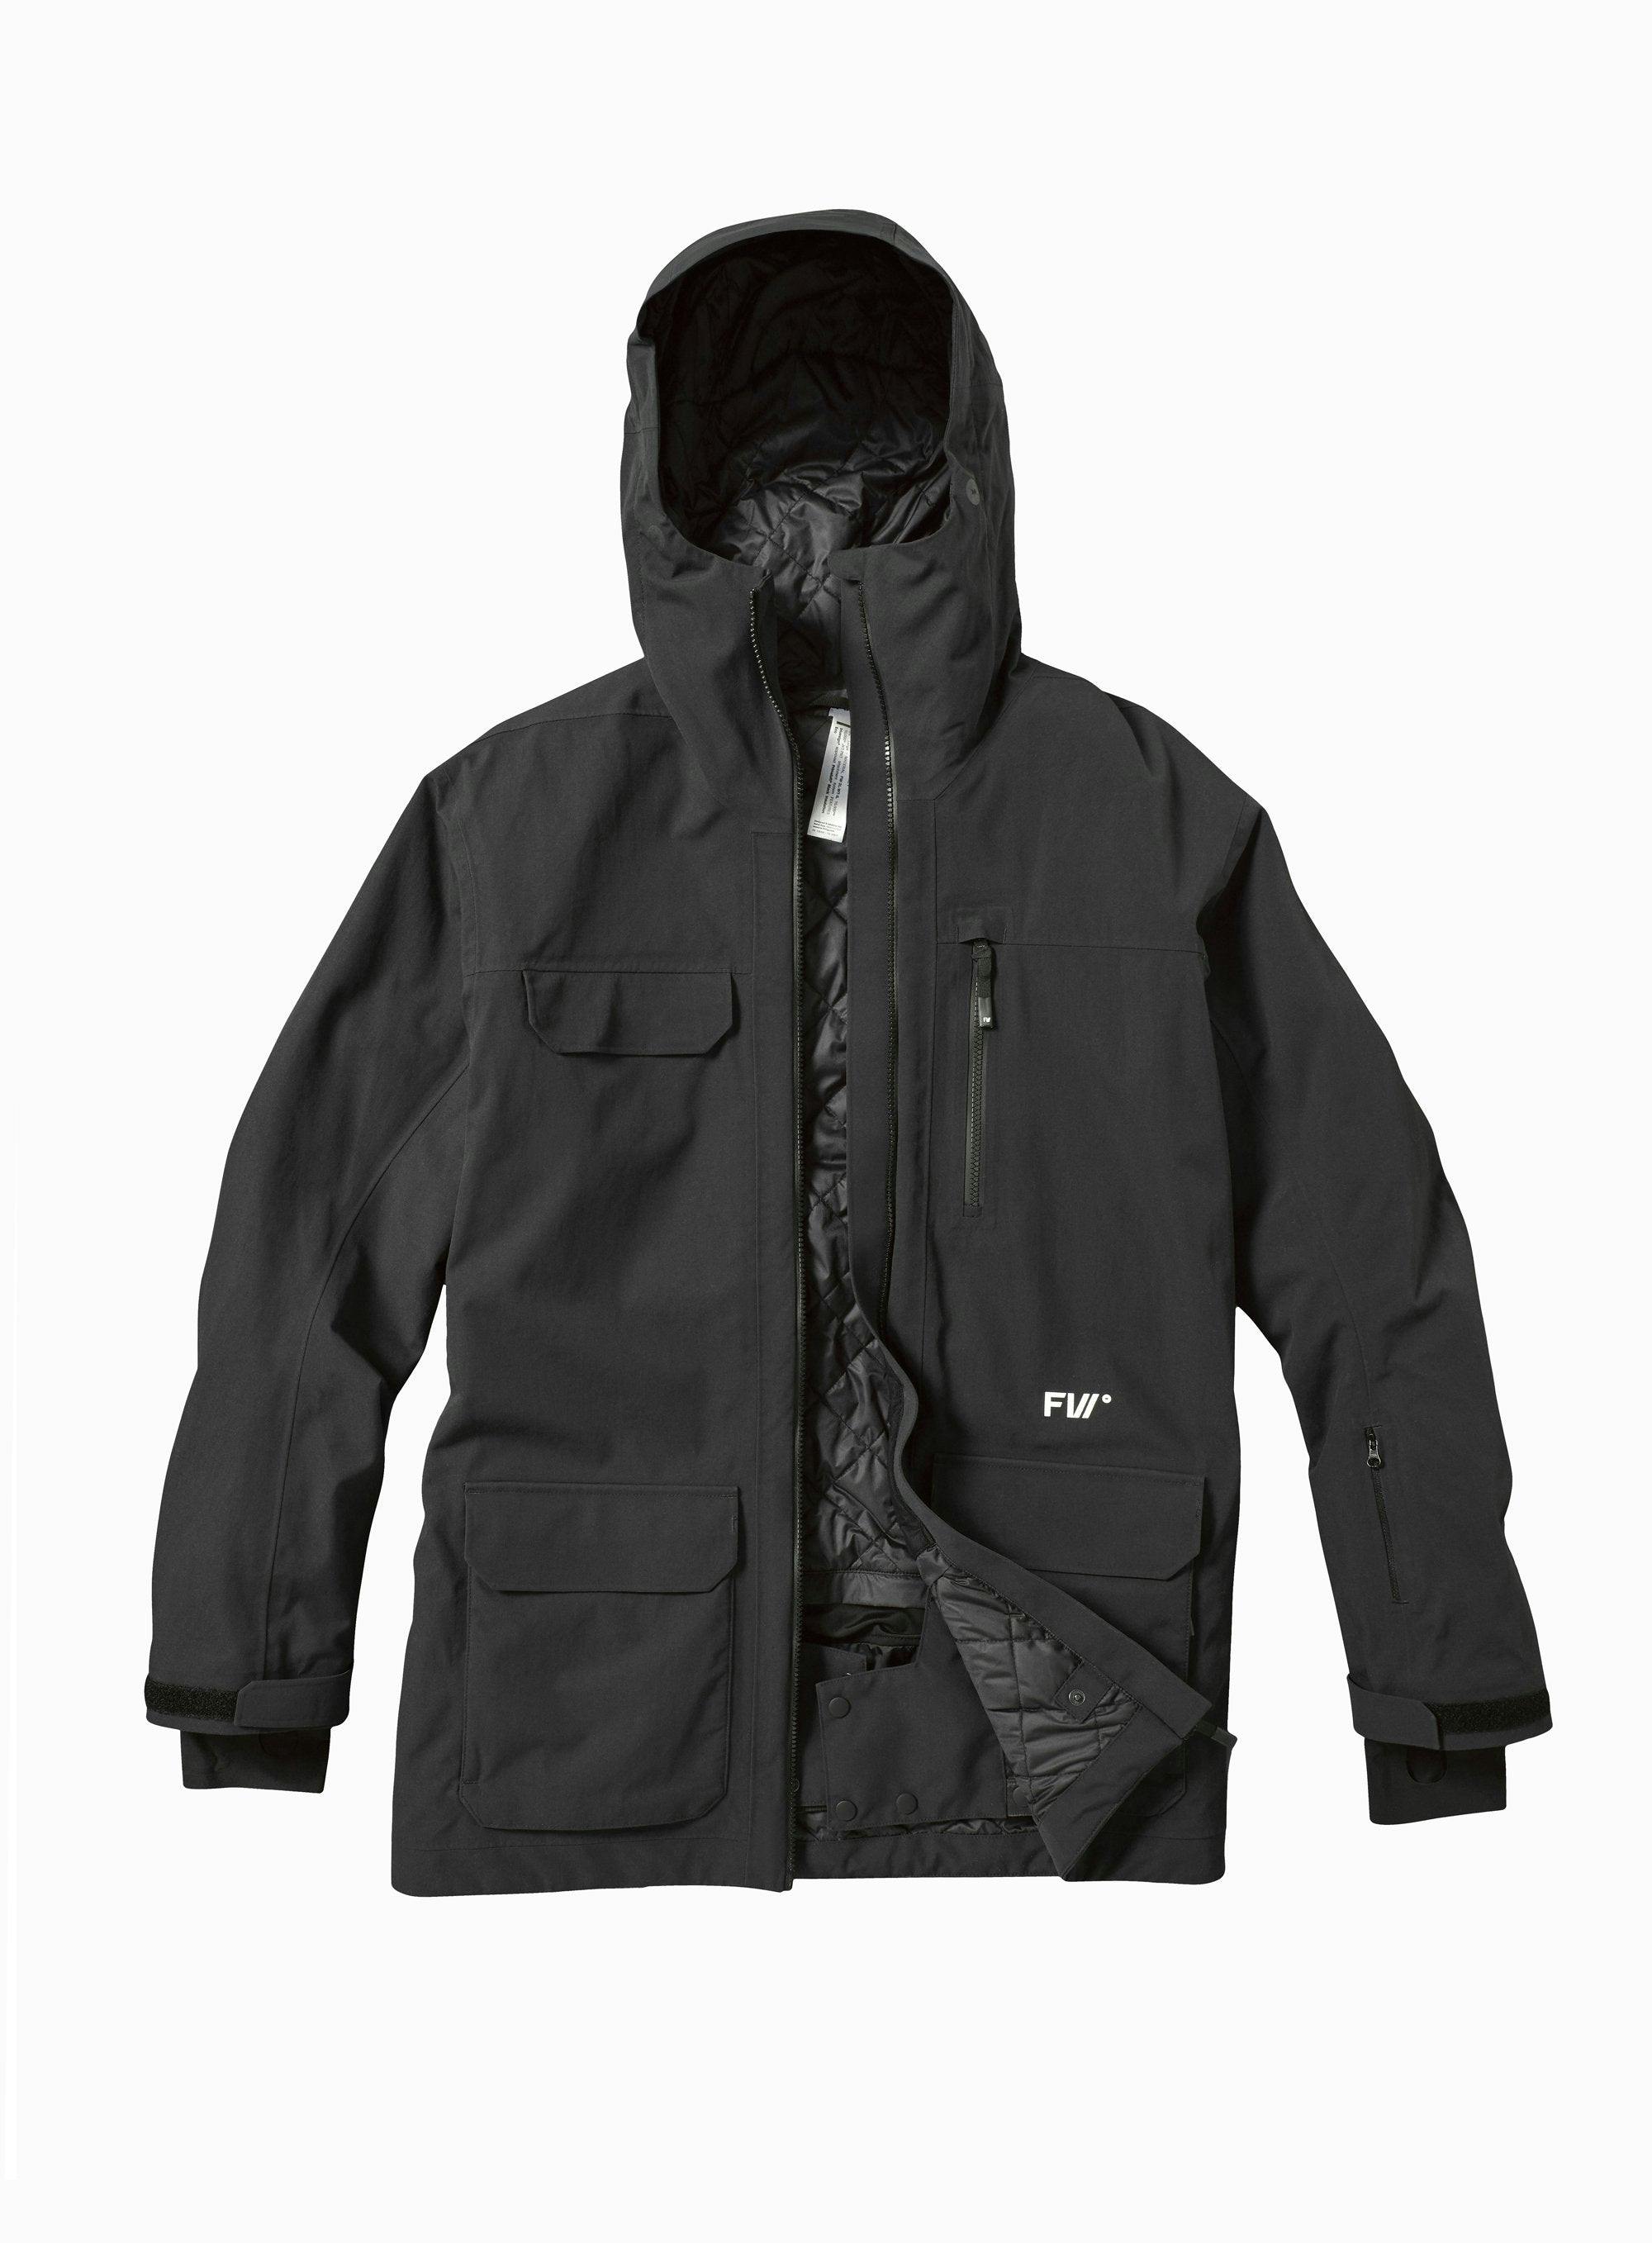 FW CATALYST 2L Insulated Jacket